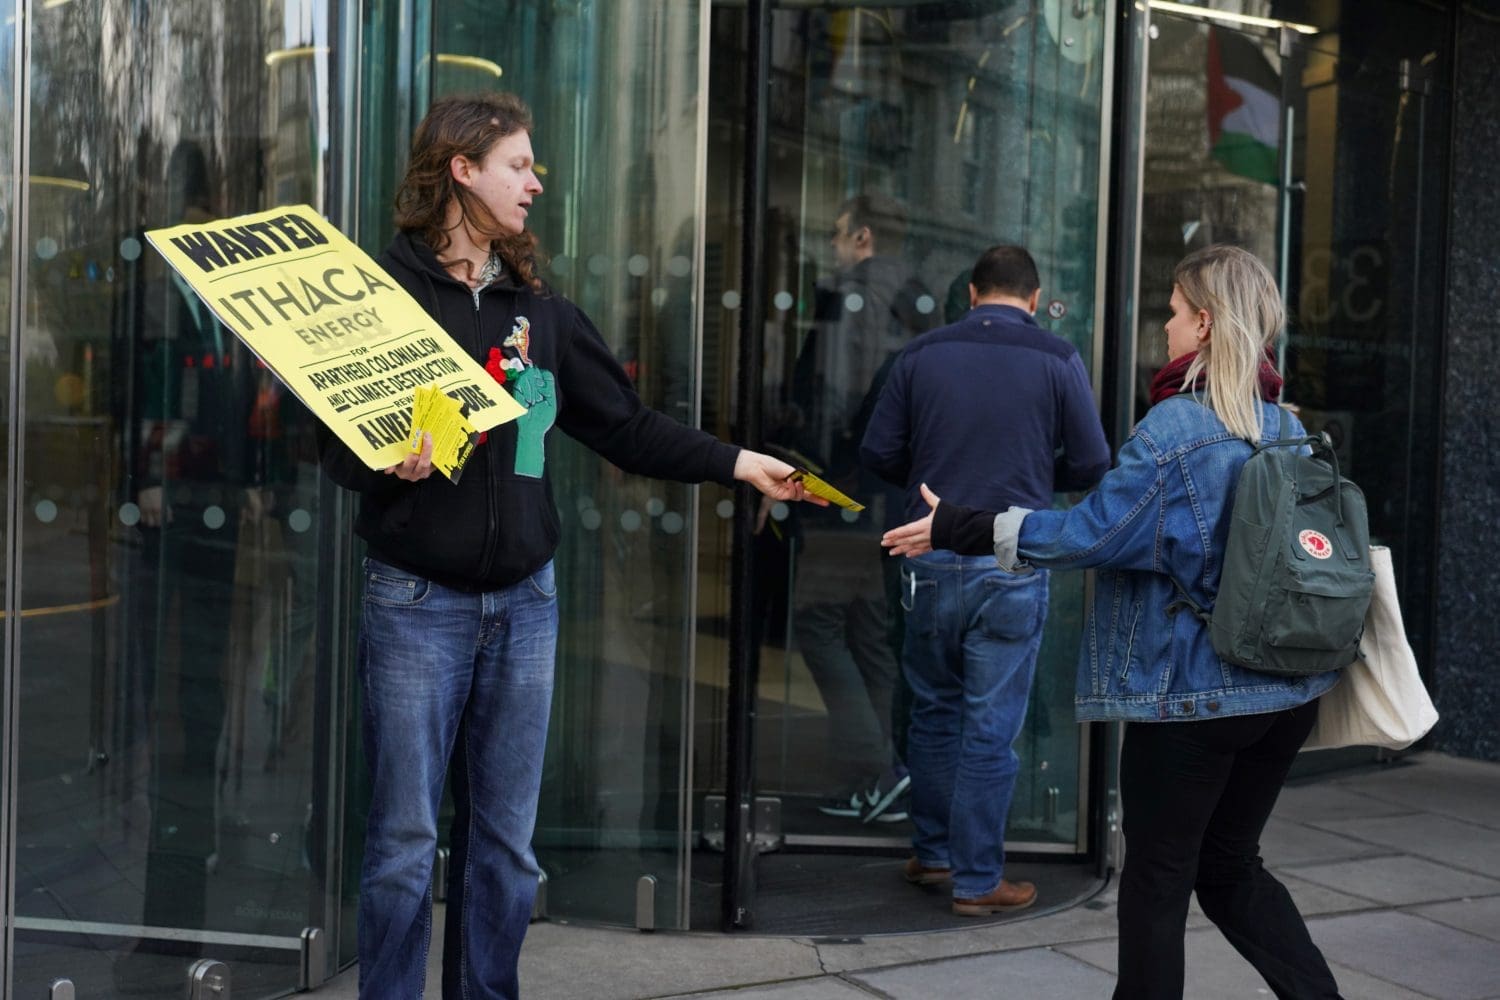 Activists hand information leaflets to Ithaca employees.